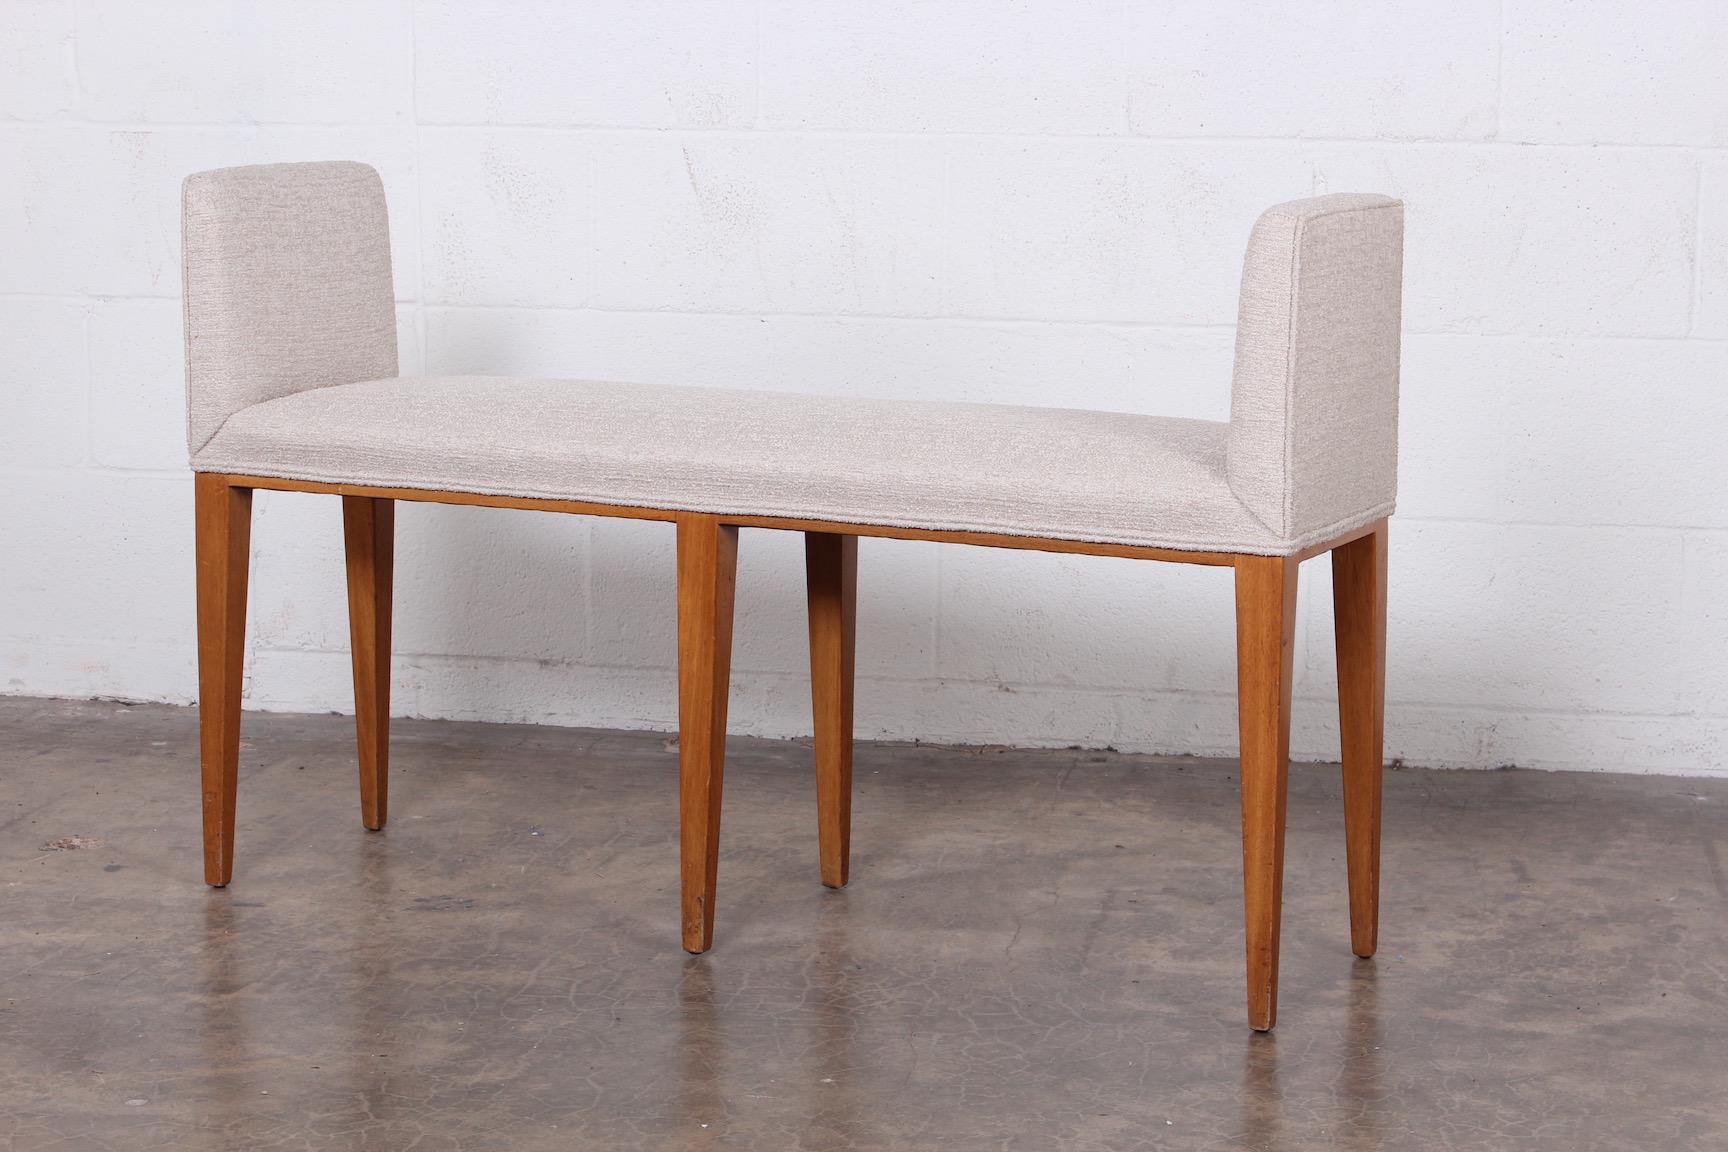 Pair of Benches by Edward Wormley for Dunbar 1